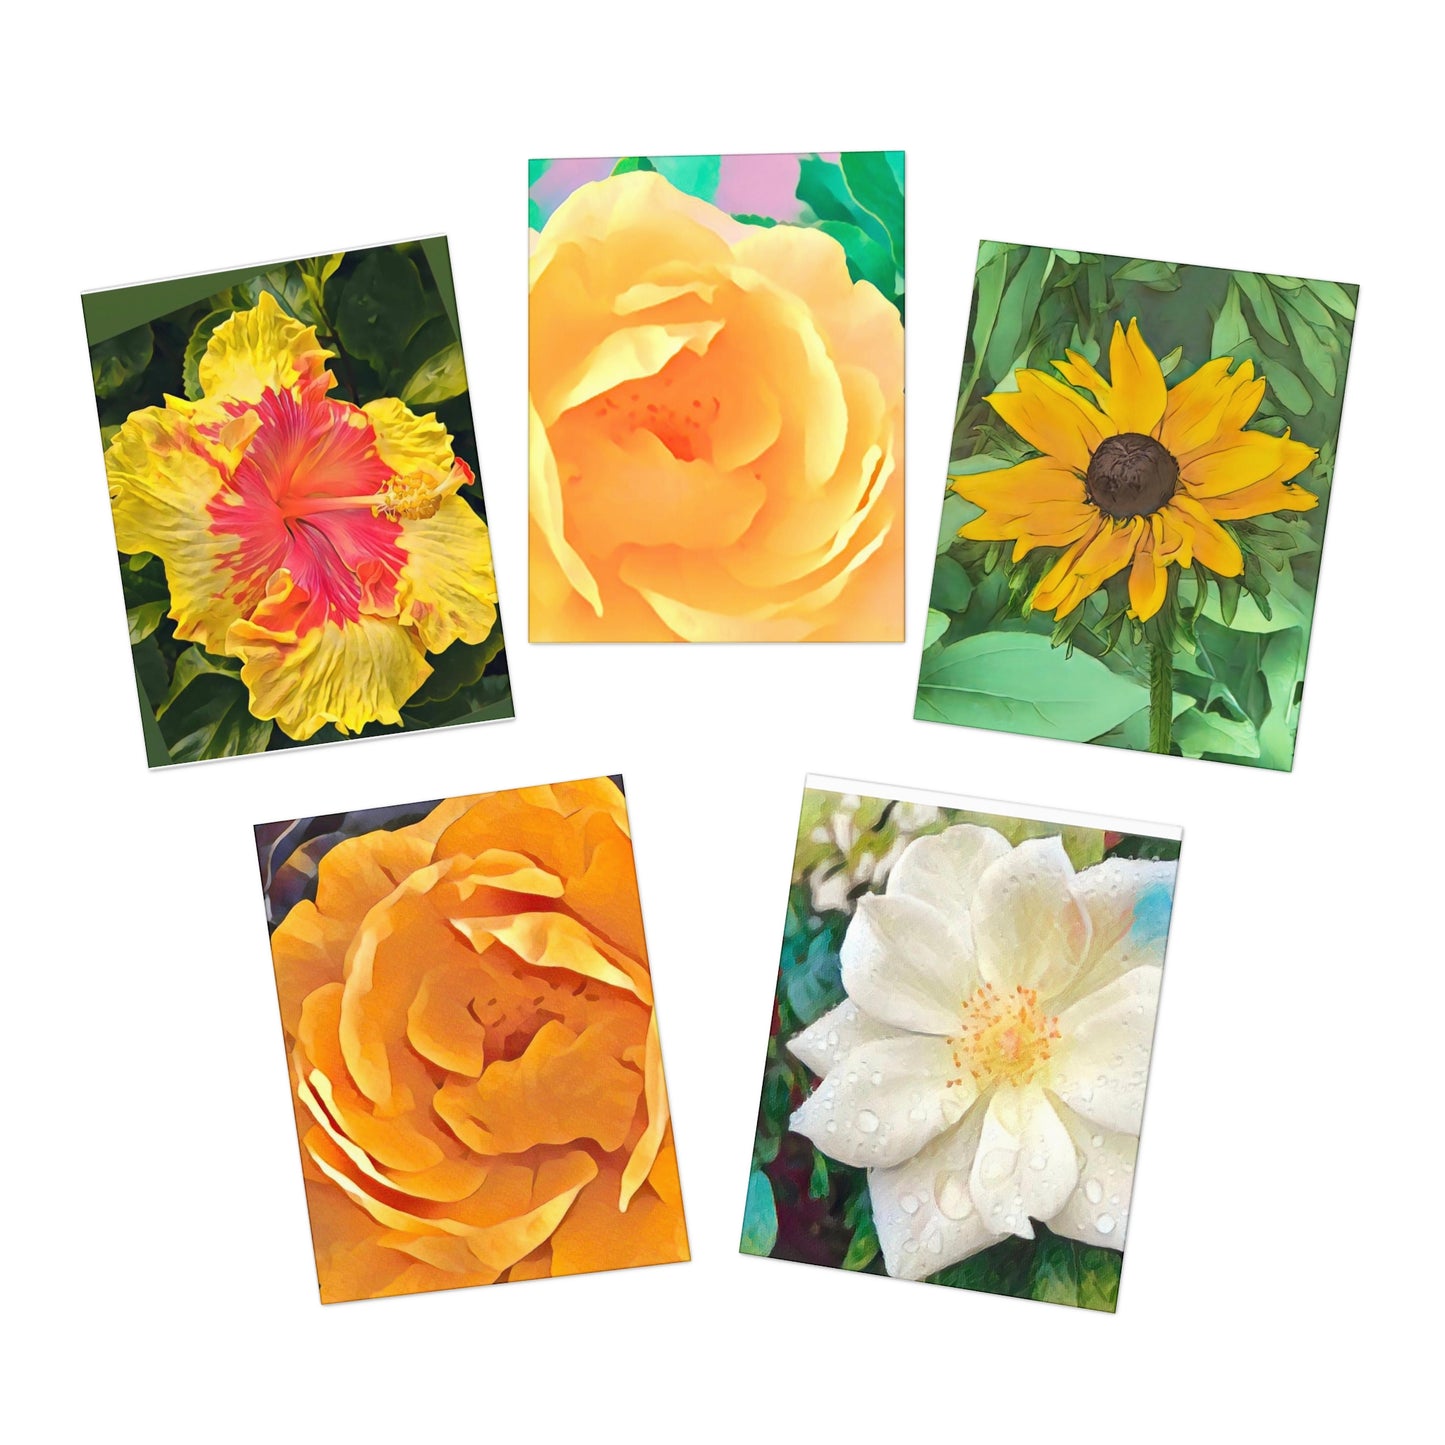 Cheerful Floral Notecards will Brighten Someone's Day!  Multi-Design Greeting Cards (5-Pack) - Blank inside